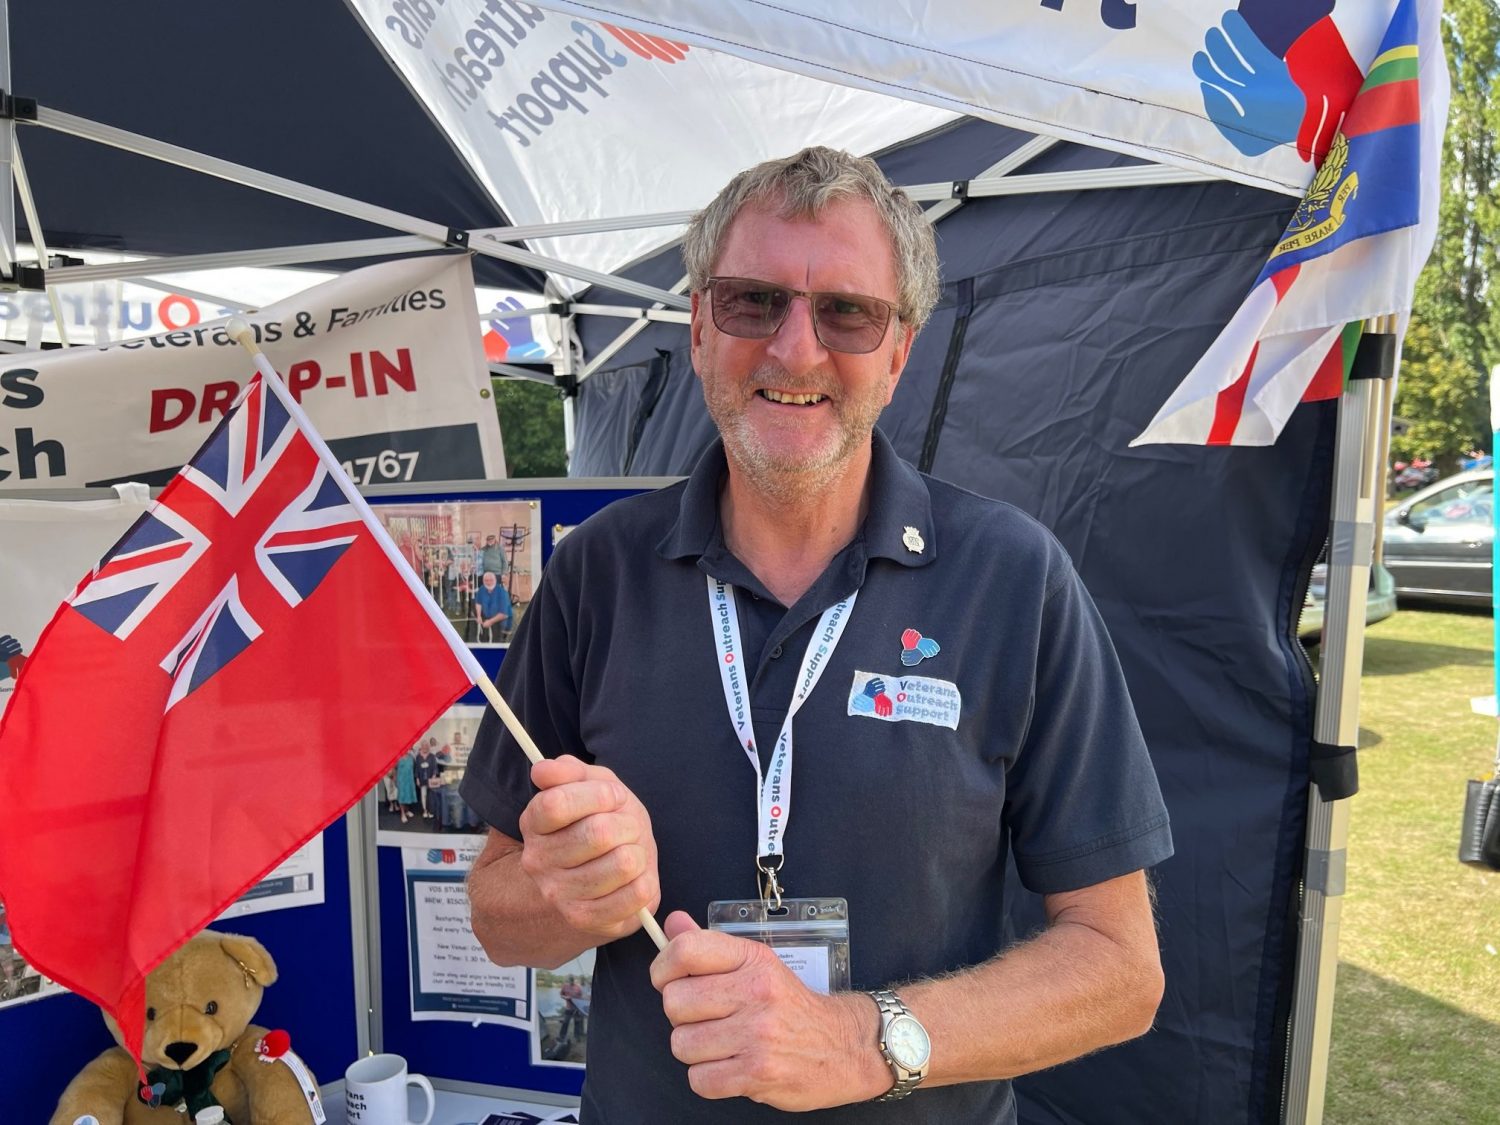 A person wearing a navy blue polo with the Veterans Outreach Support charity logo on it, a Veterans Outreach Support lanyard on, holding a Merchant Navy Red Ensign flag | VOS